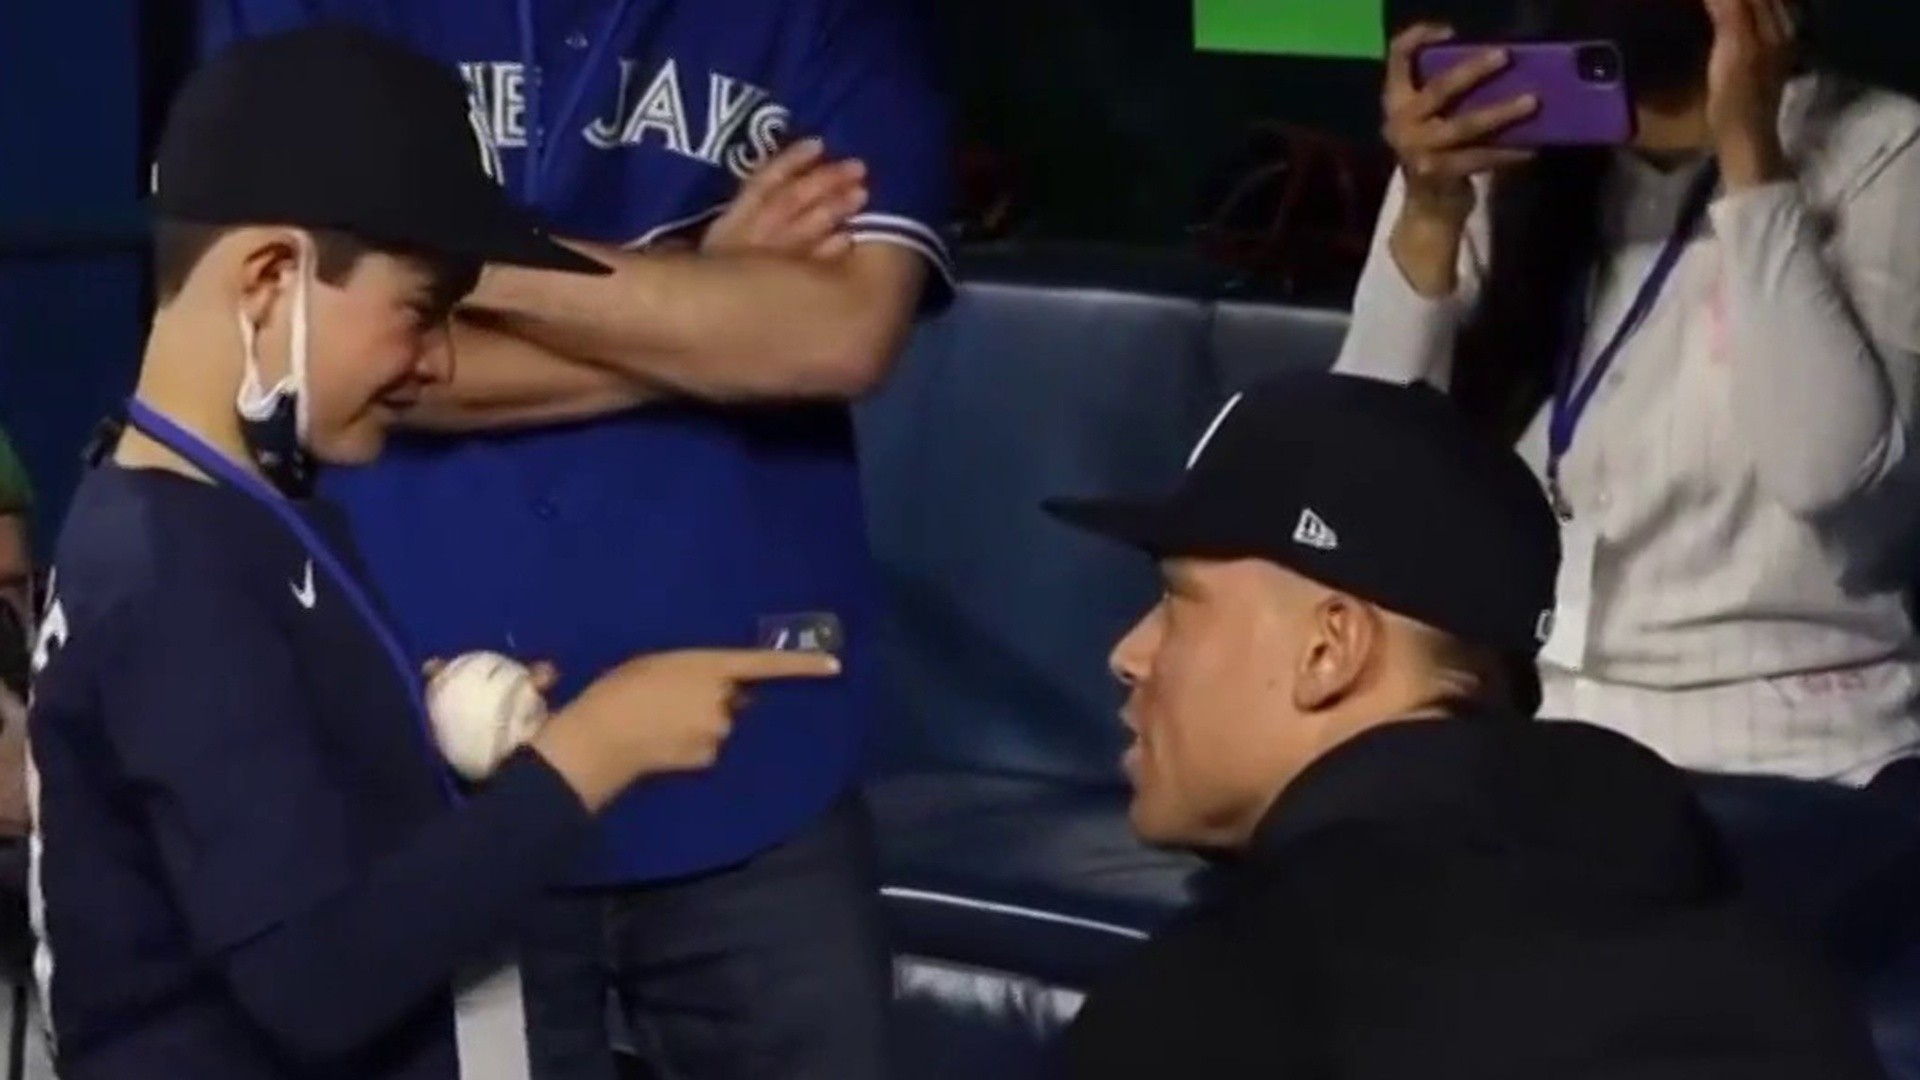 Judge meets young Yankees fan after viral heartwarming moment